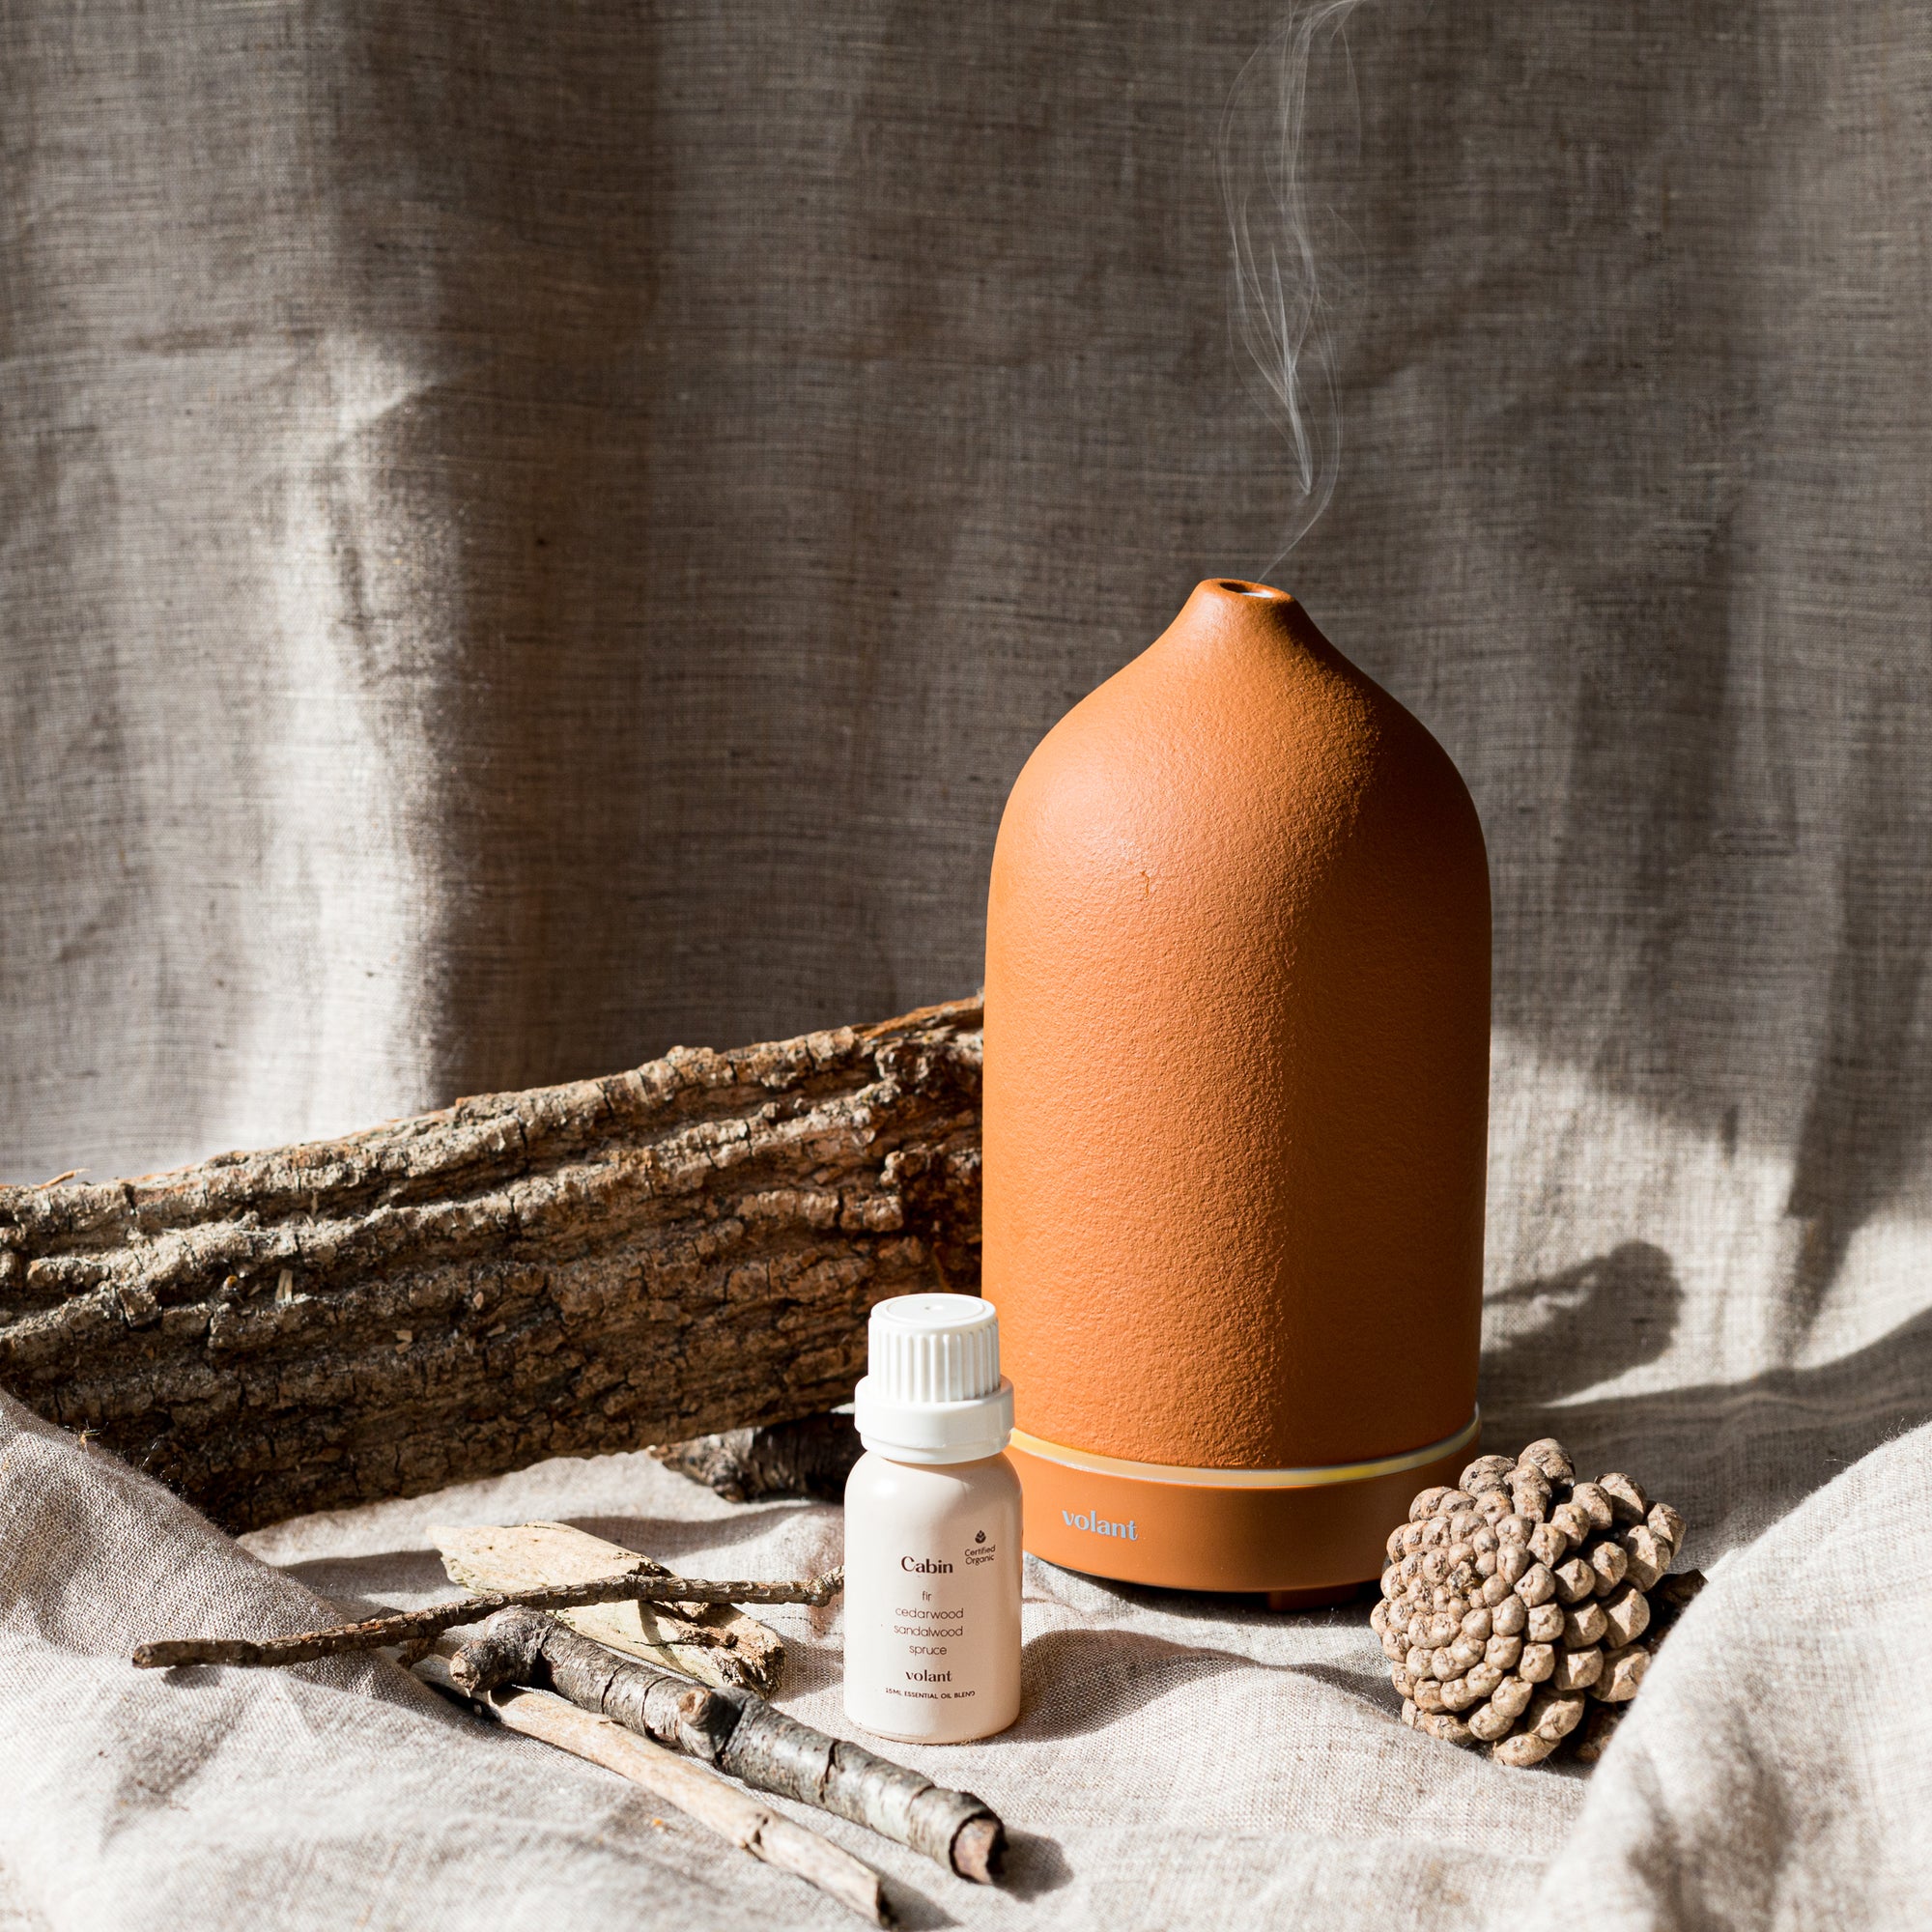 volant clay diffuser using cabin essential oil blend made with fresh Fir, Cedarwood, Spruce, and Sandalwood